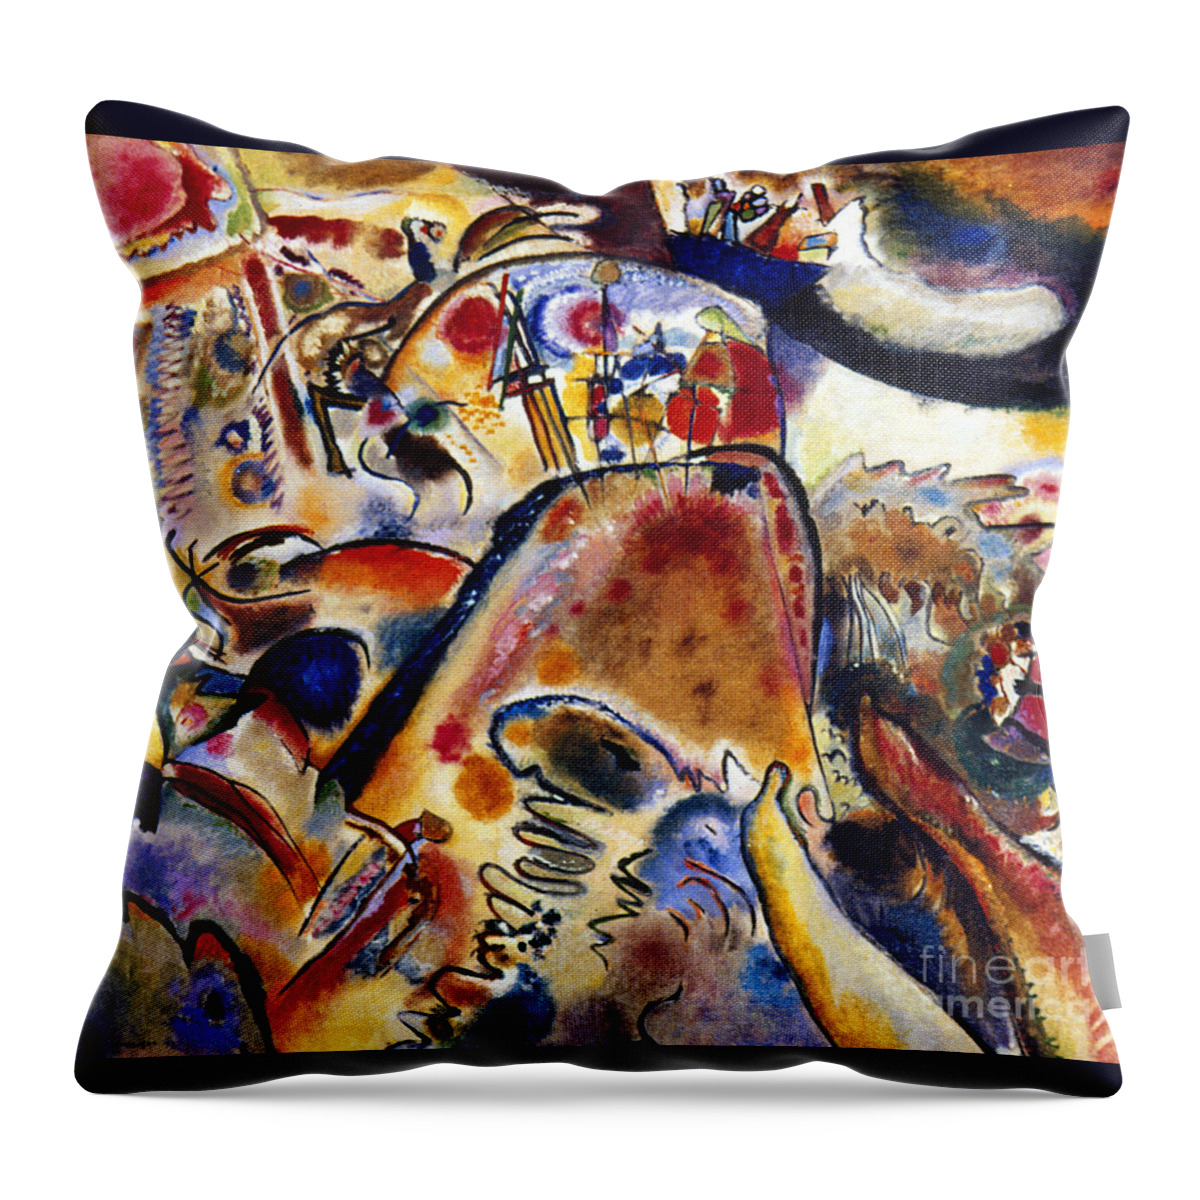 1913 Throw Pillow featuring the painting Kandinsky Small Pleasures by Granger